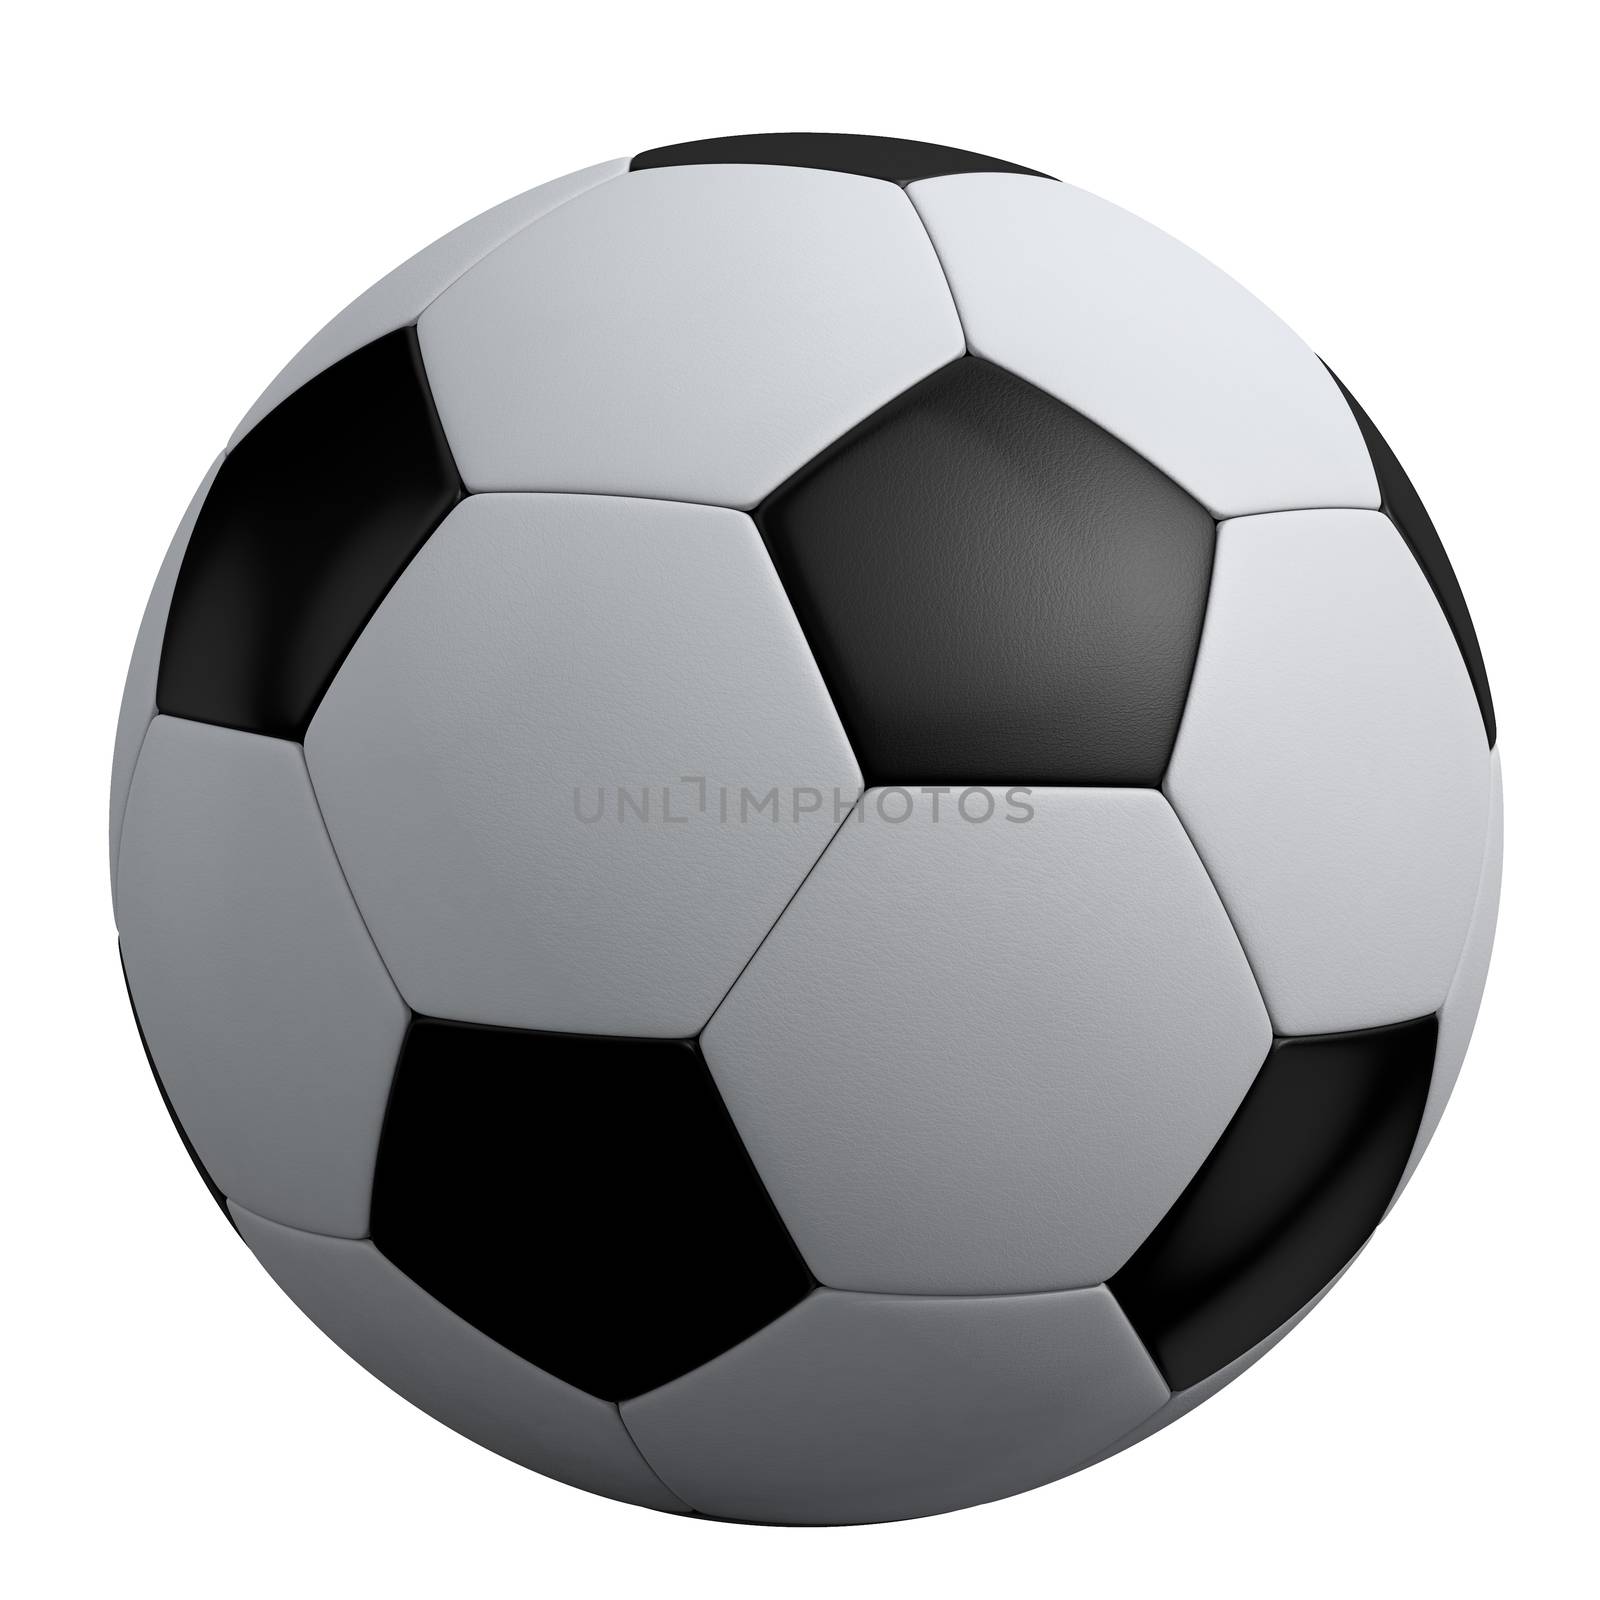 soccer ball isolated on white background